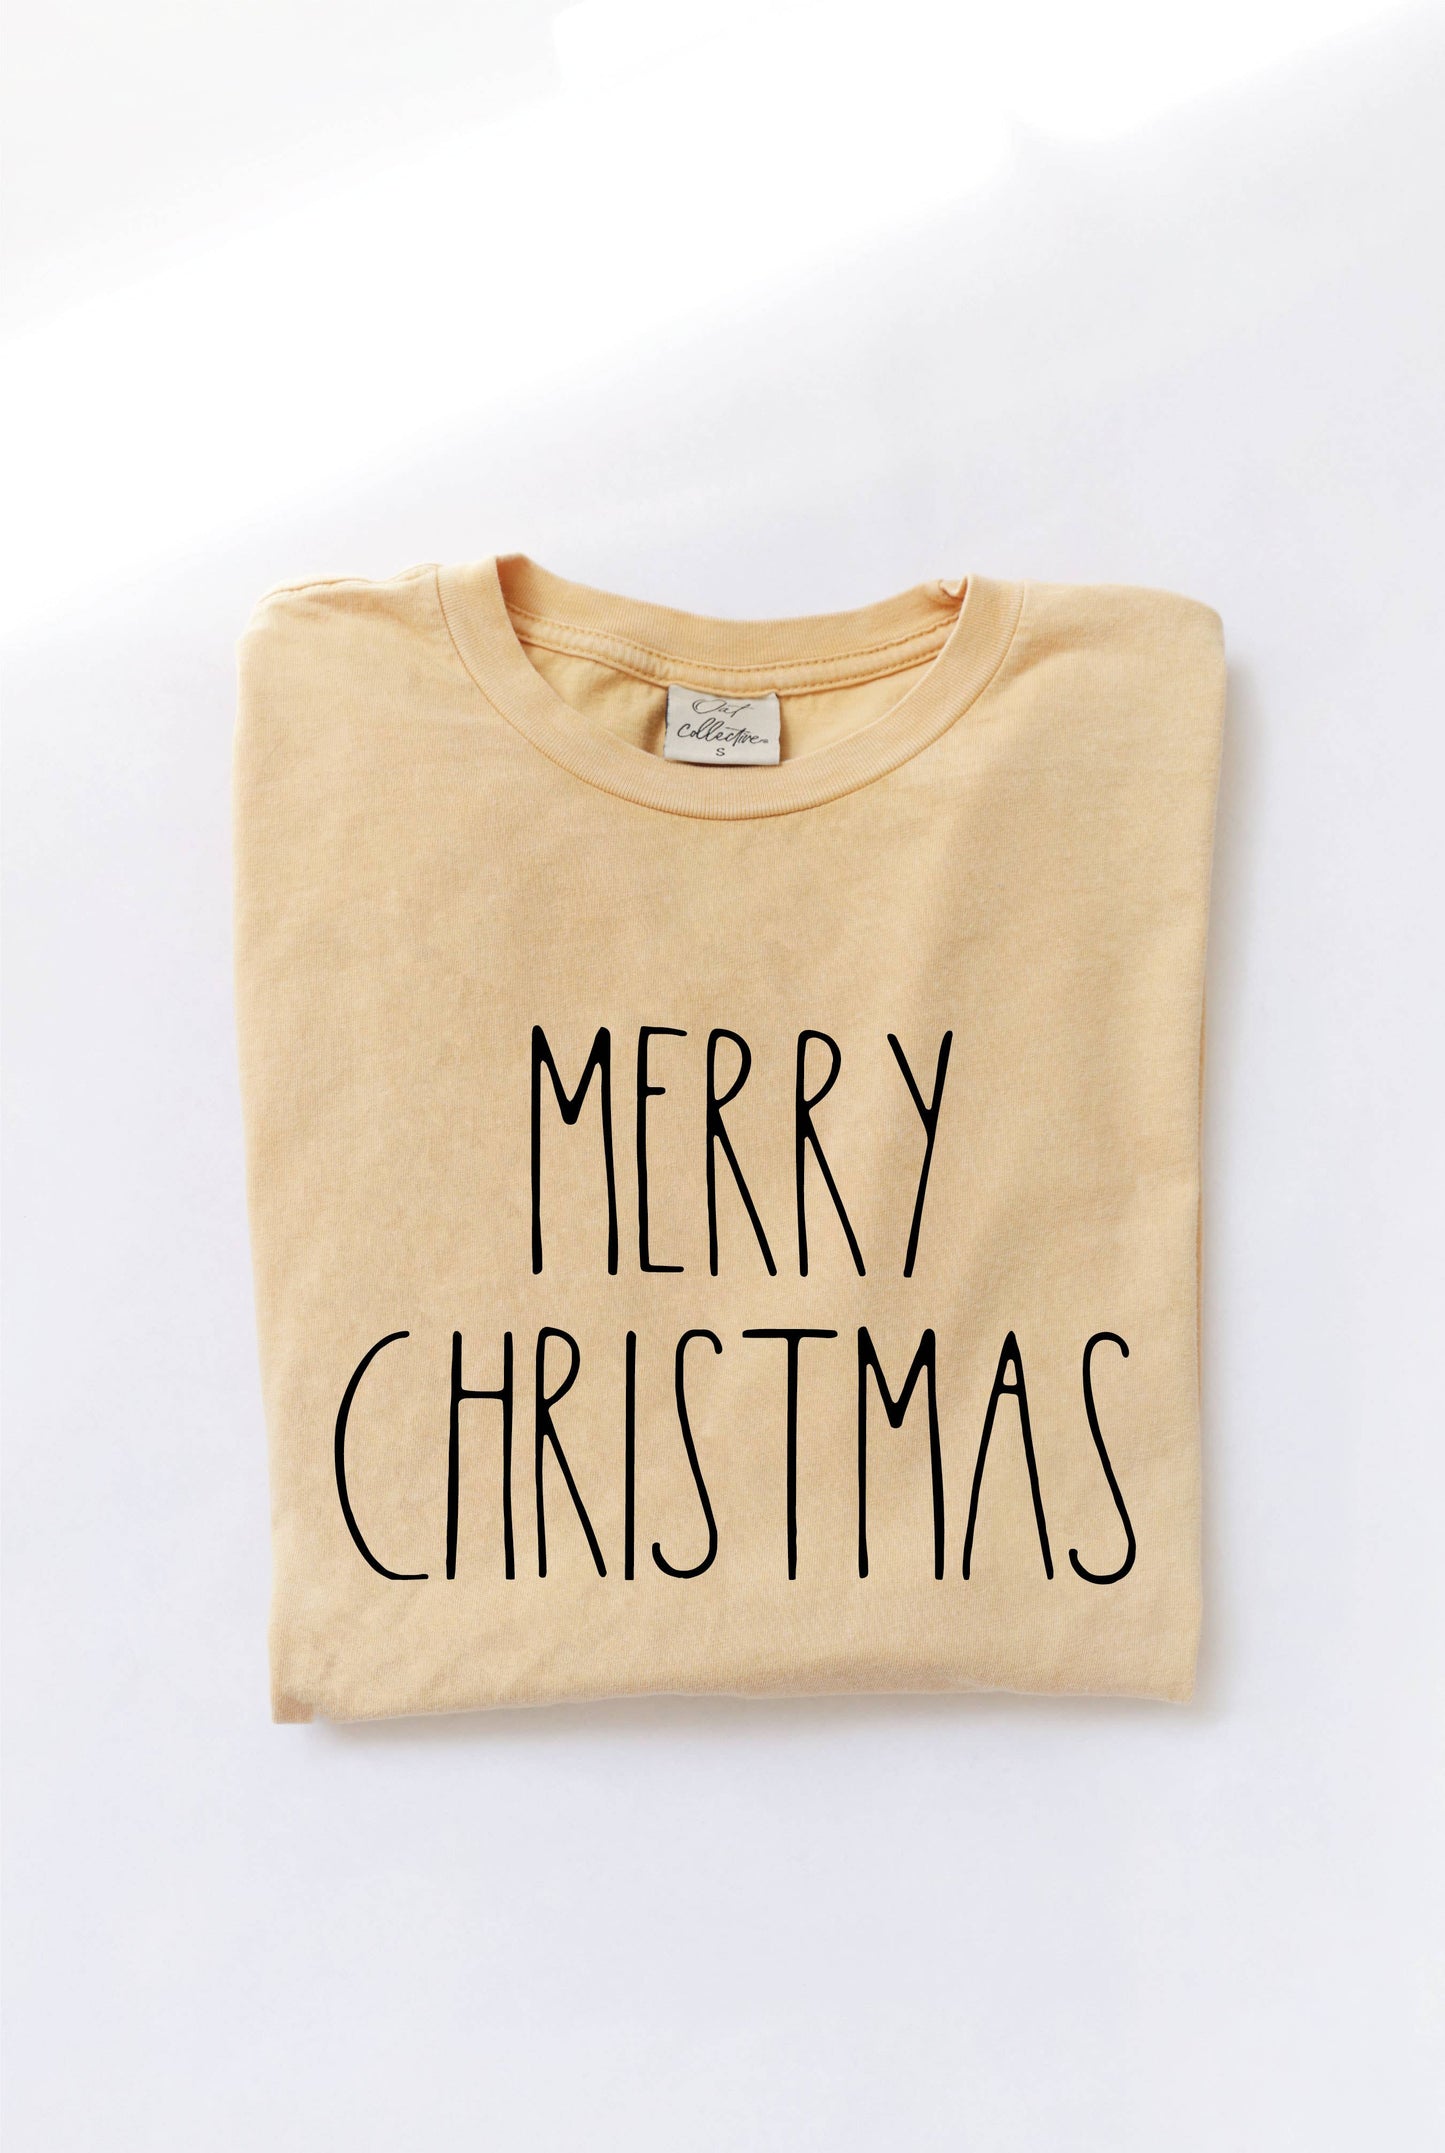 MERRY CHRISTMAS Mineral Graphic Top